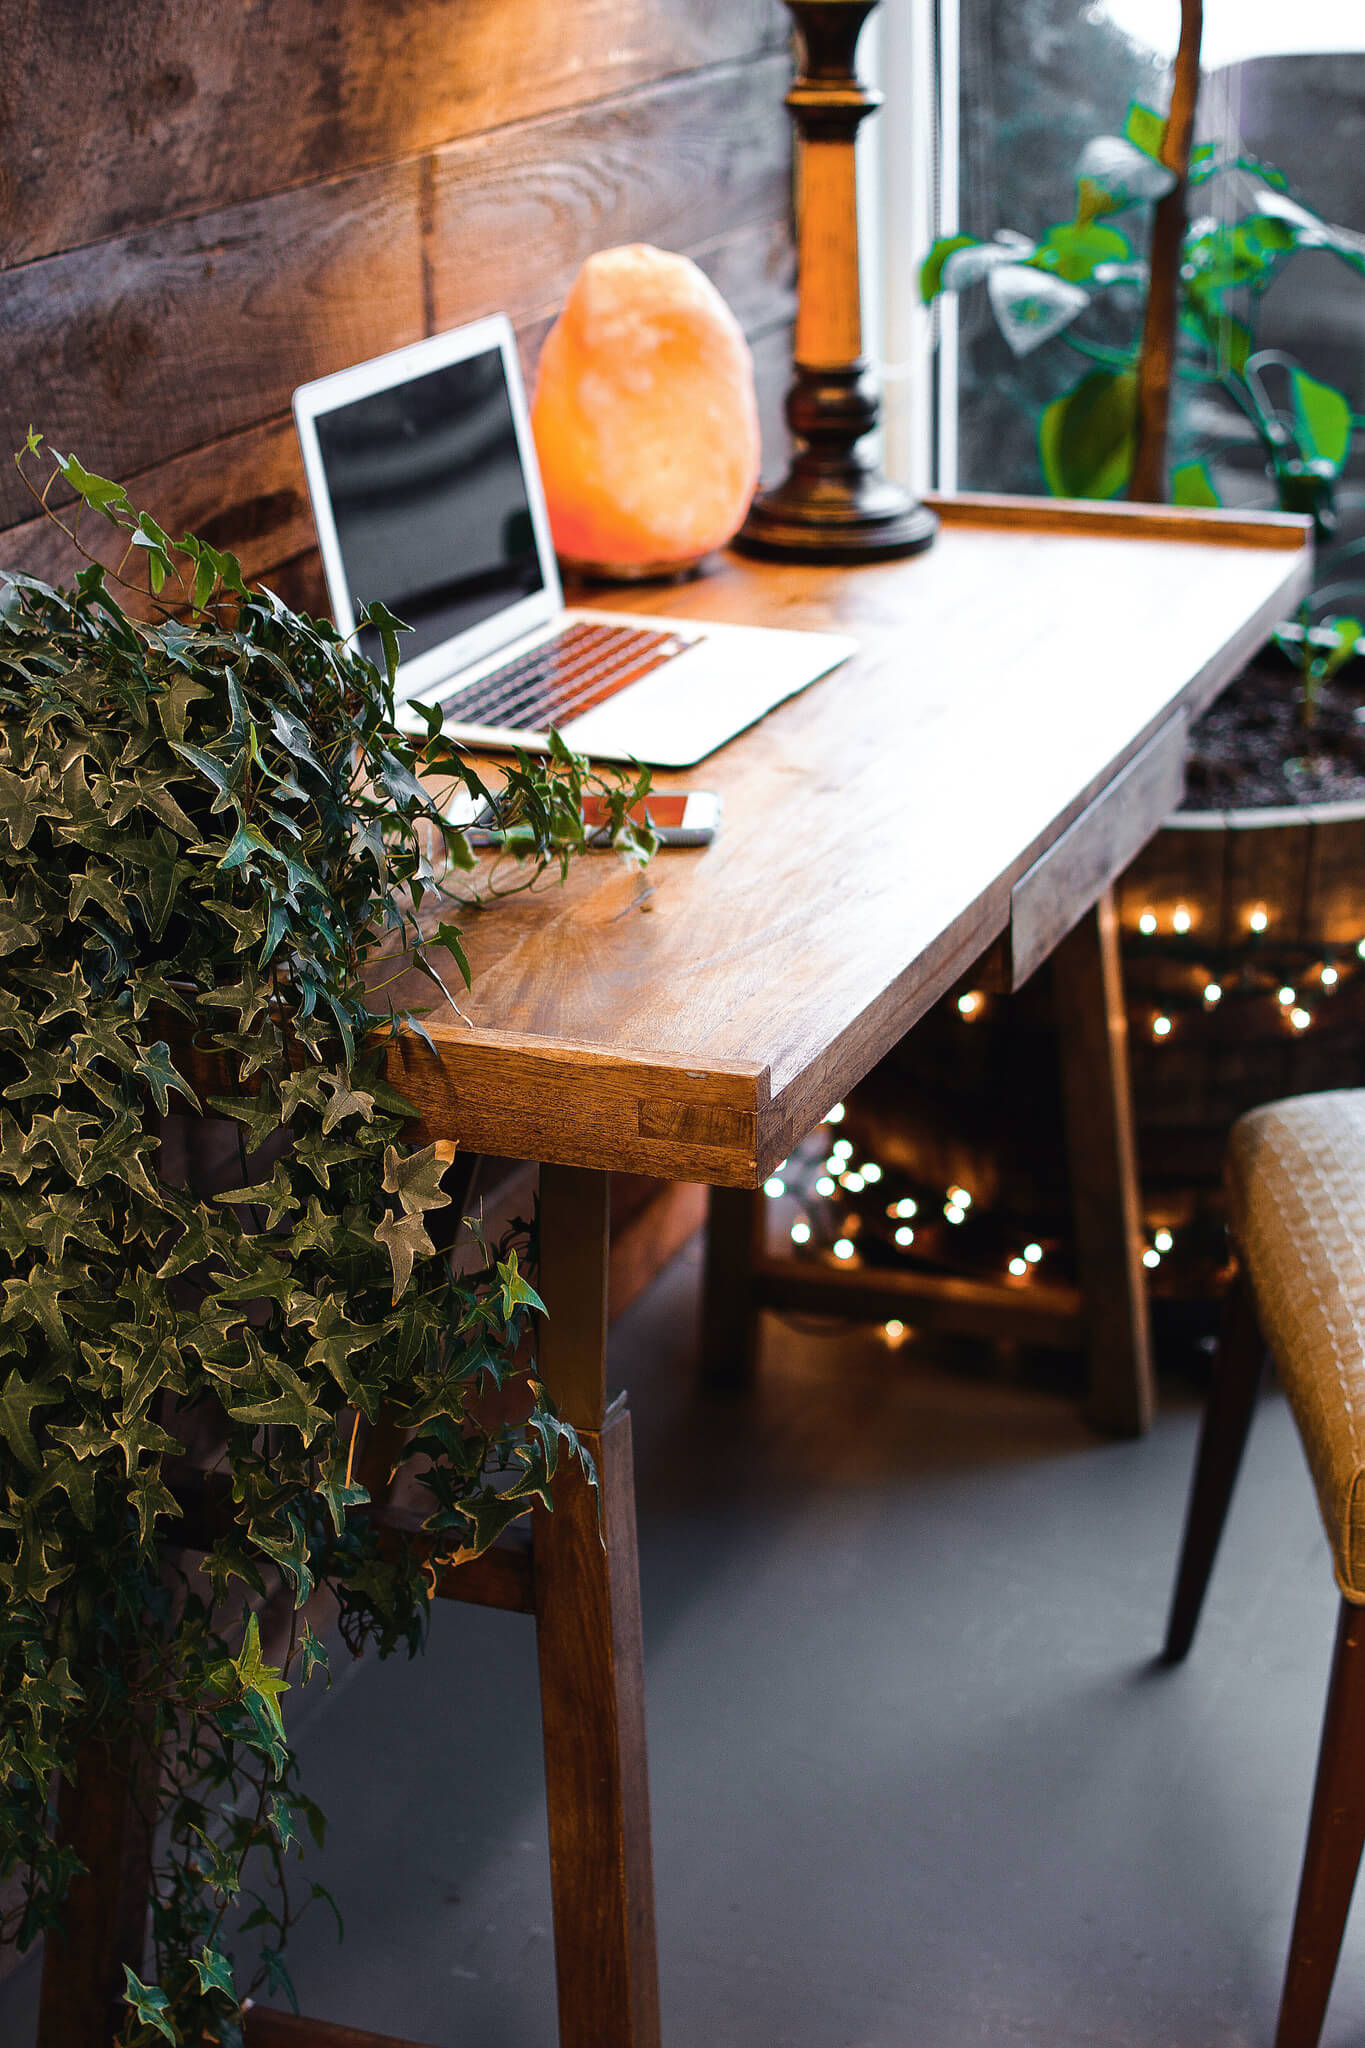 A wooden desk with a laptop and a salt lamp